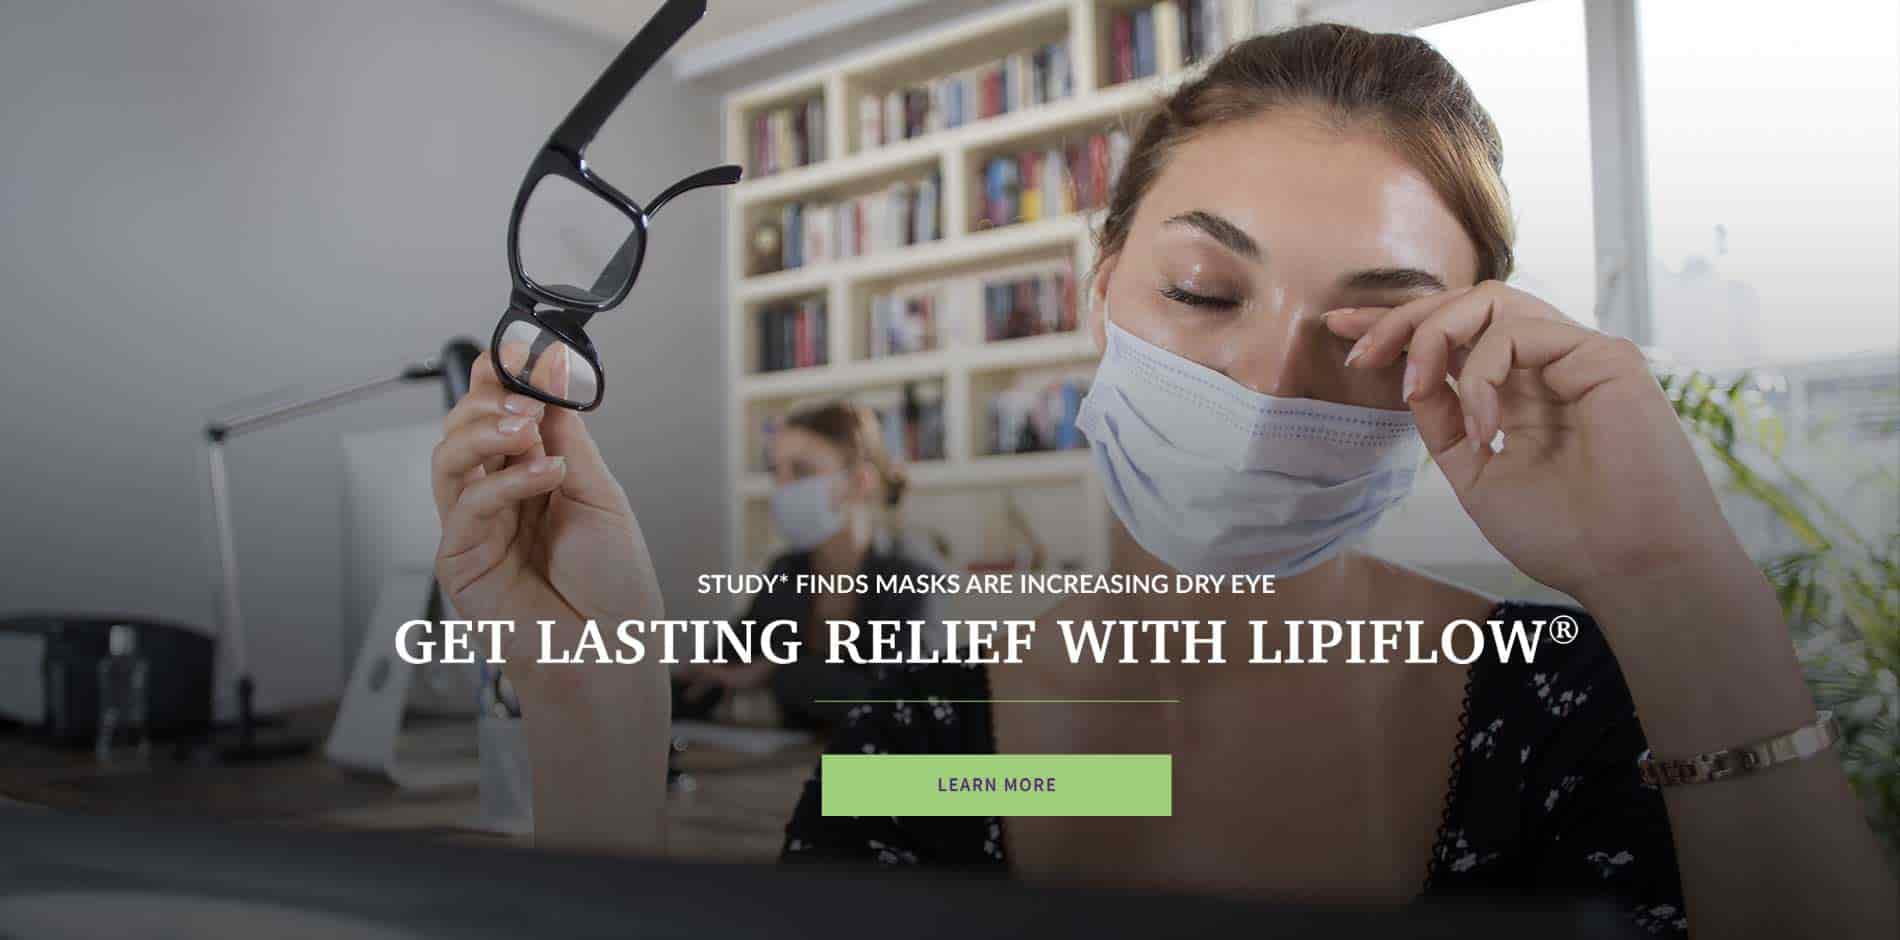 Study finds masks are increasing dry eye - Get Lasting Relief with LipiFlow